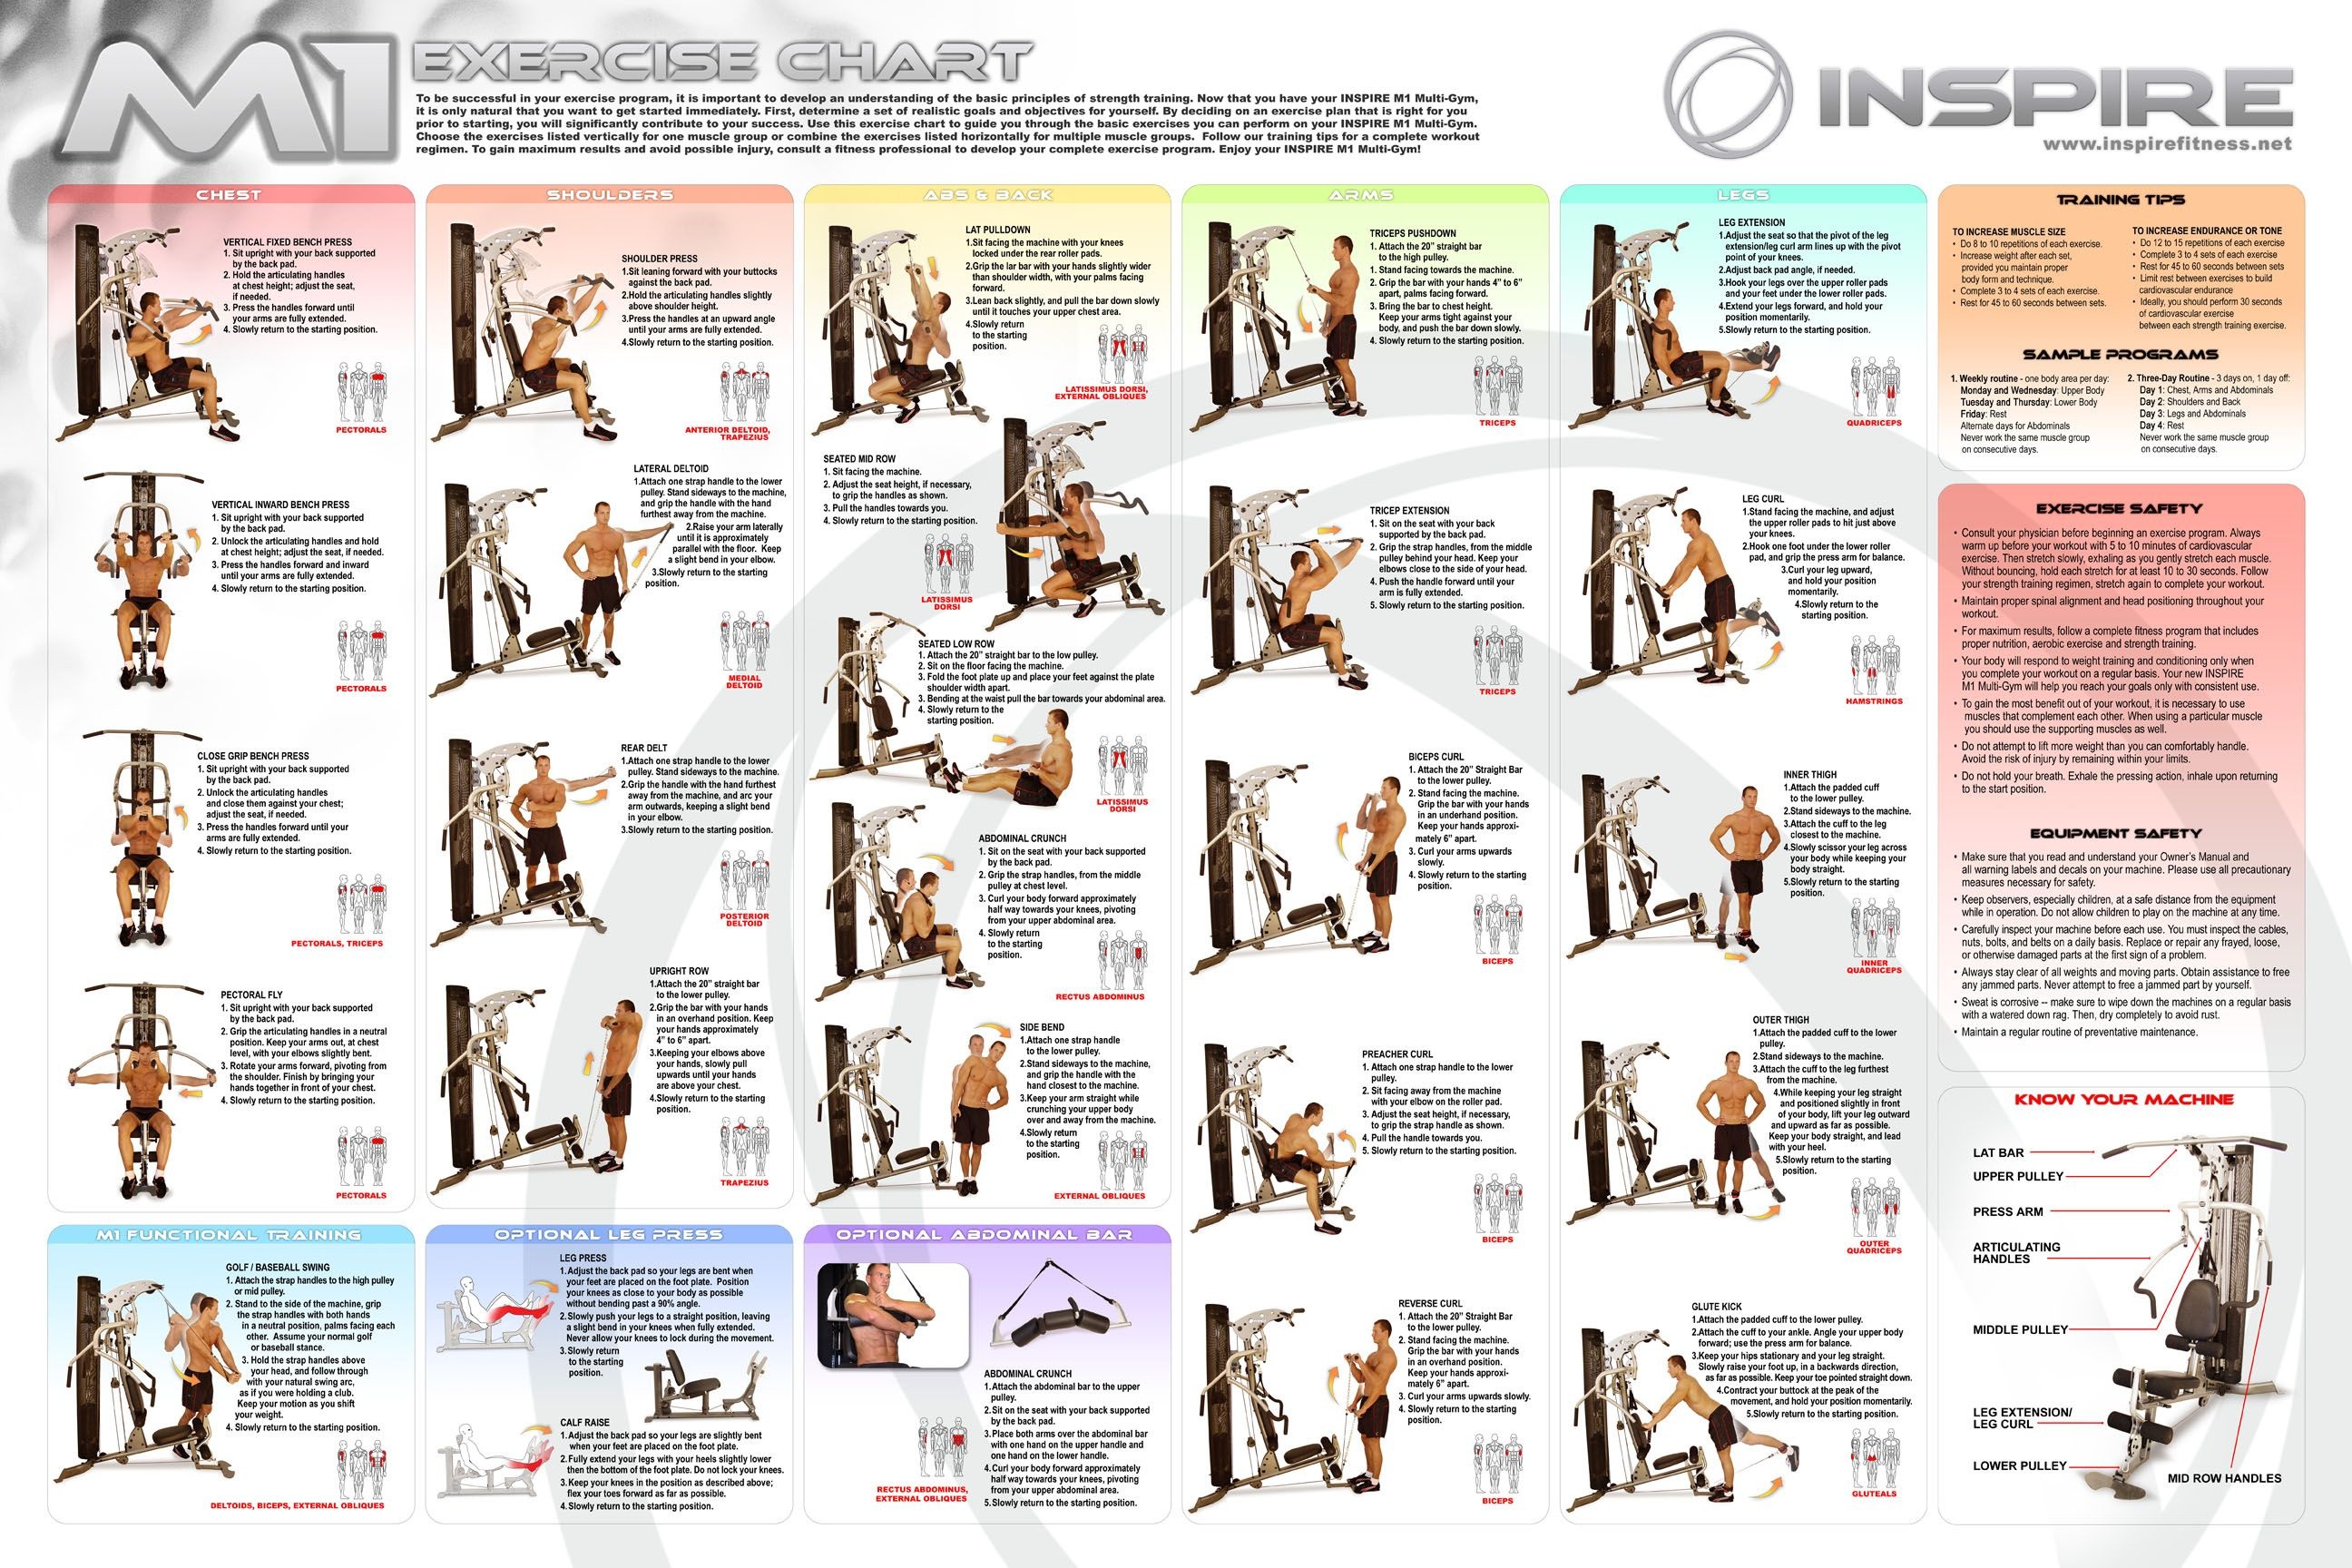 Weight Machine Workout Routines Printable Gym Workout Plans | Ellipsis - Free Printable Gym Workout Routines